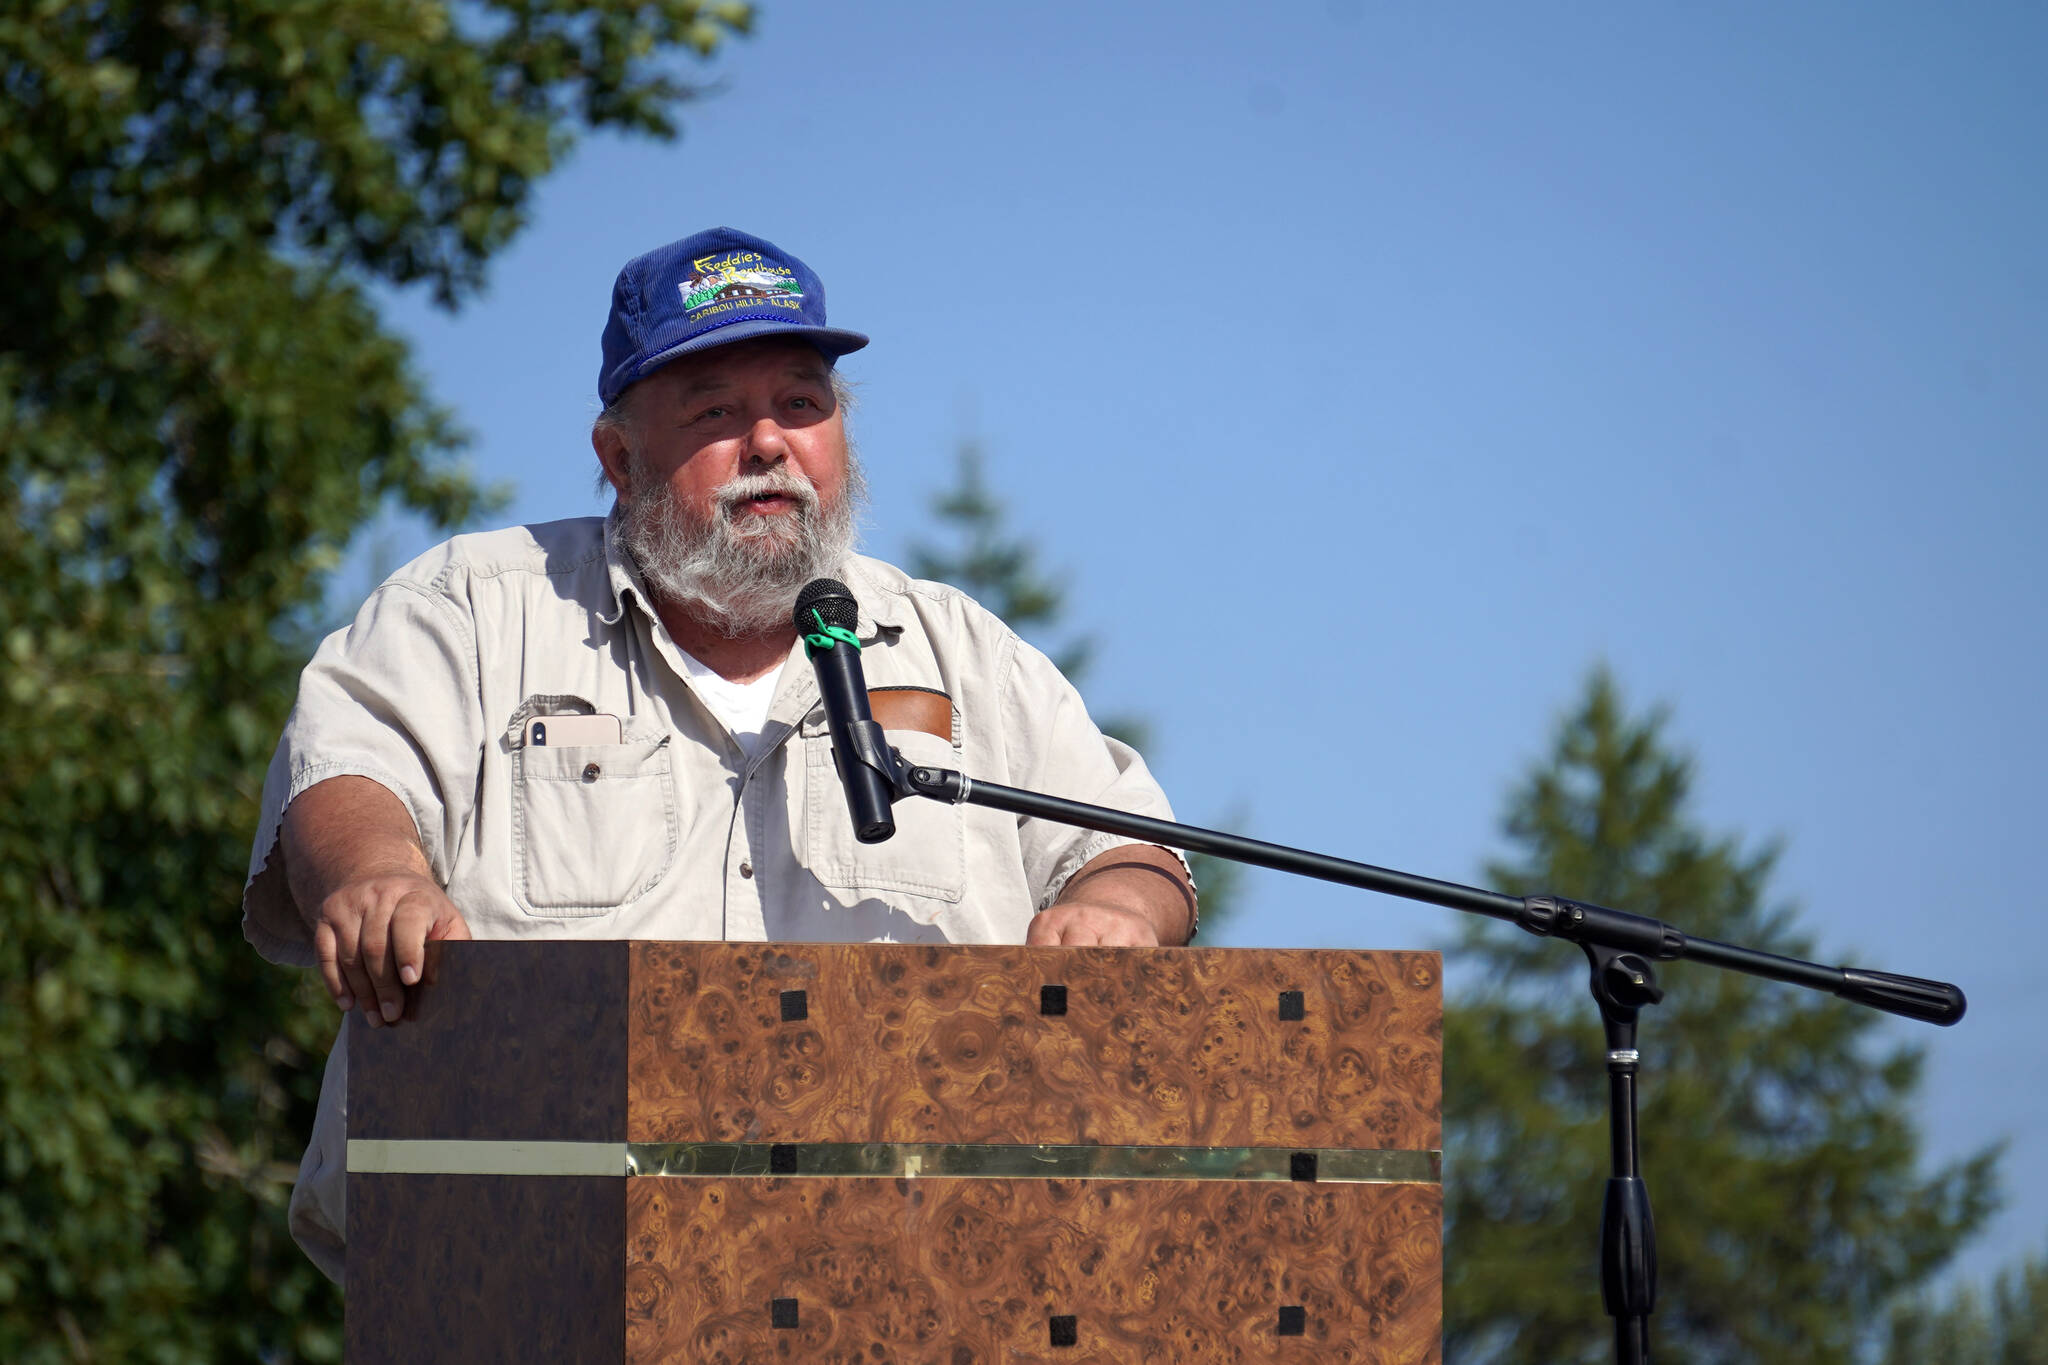 Freddie Pollard Sr. speaks after receiving the Don Gilman Outstanding Service to the Community Award during Industry Appreciation Day festivities at the Kenai softball greenstrip on Saturday, Aug. 19, 2023. (Jake Dye/Peninsula Clarion)